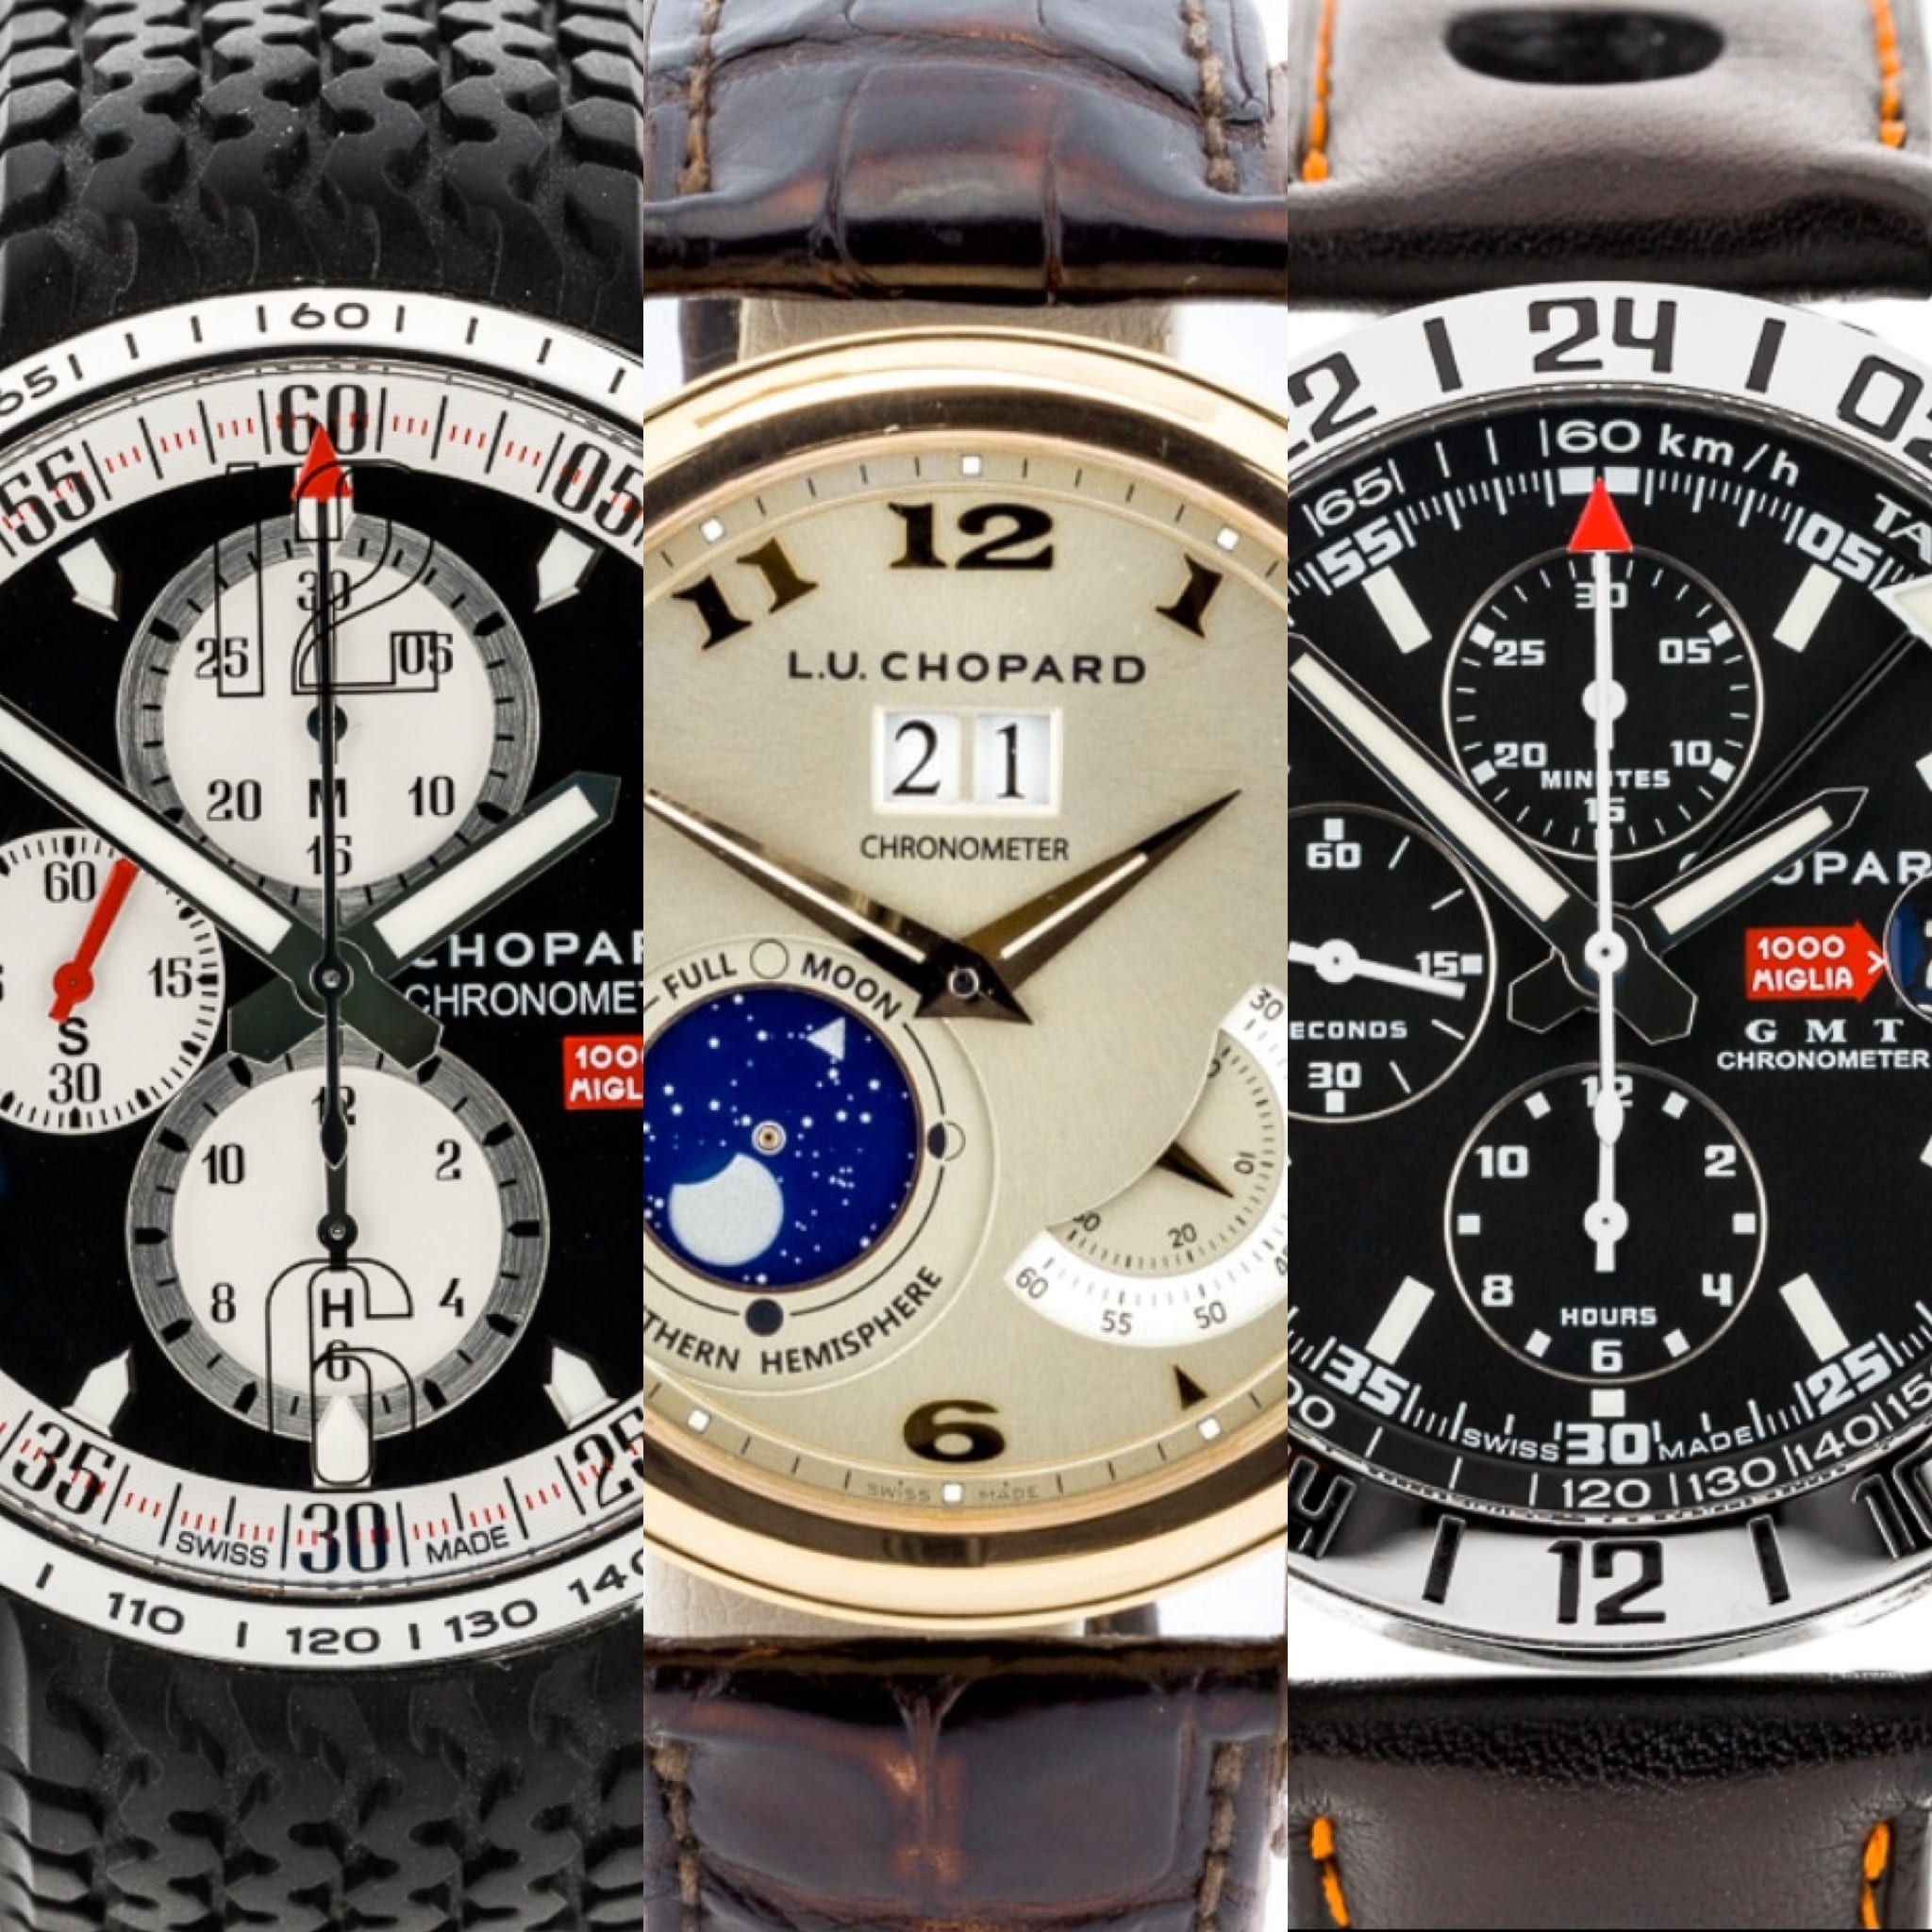 Pre-owned Watches by Depot Luxury — Depot Luxury